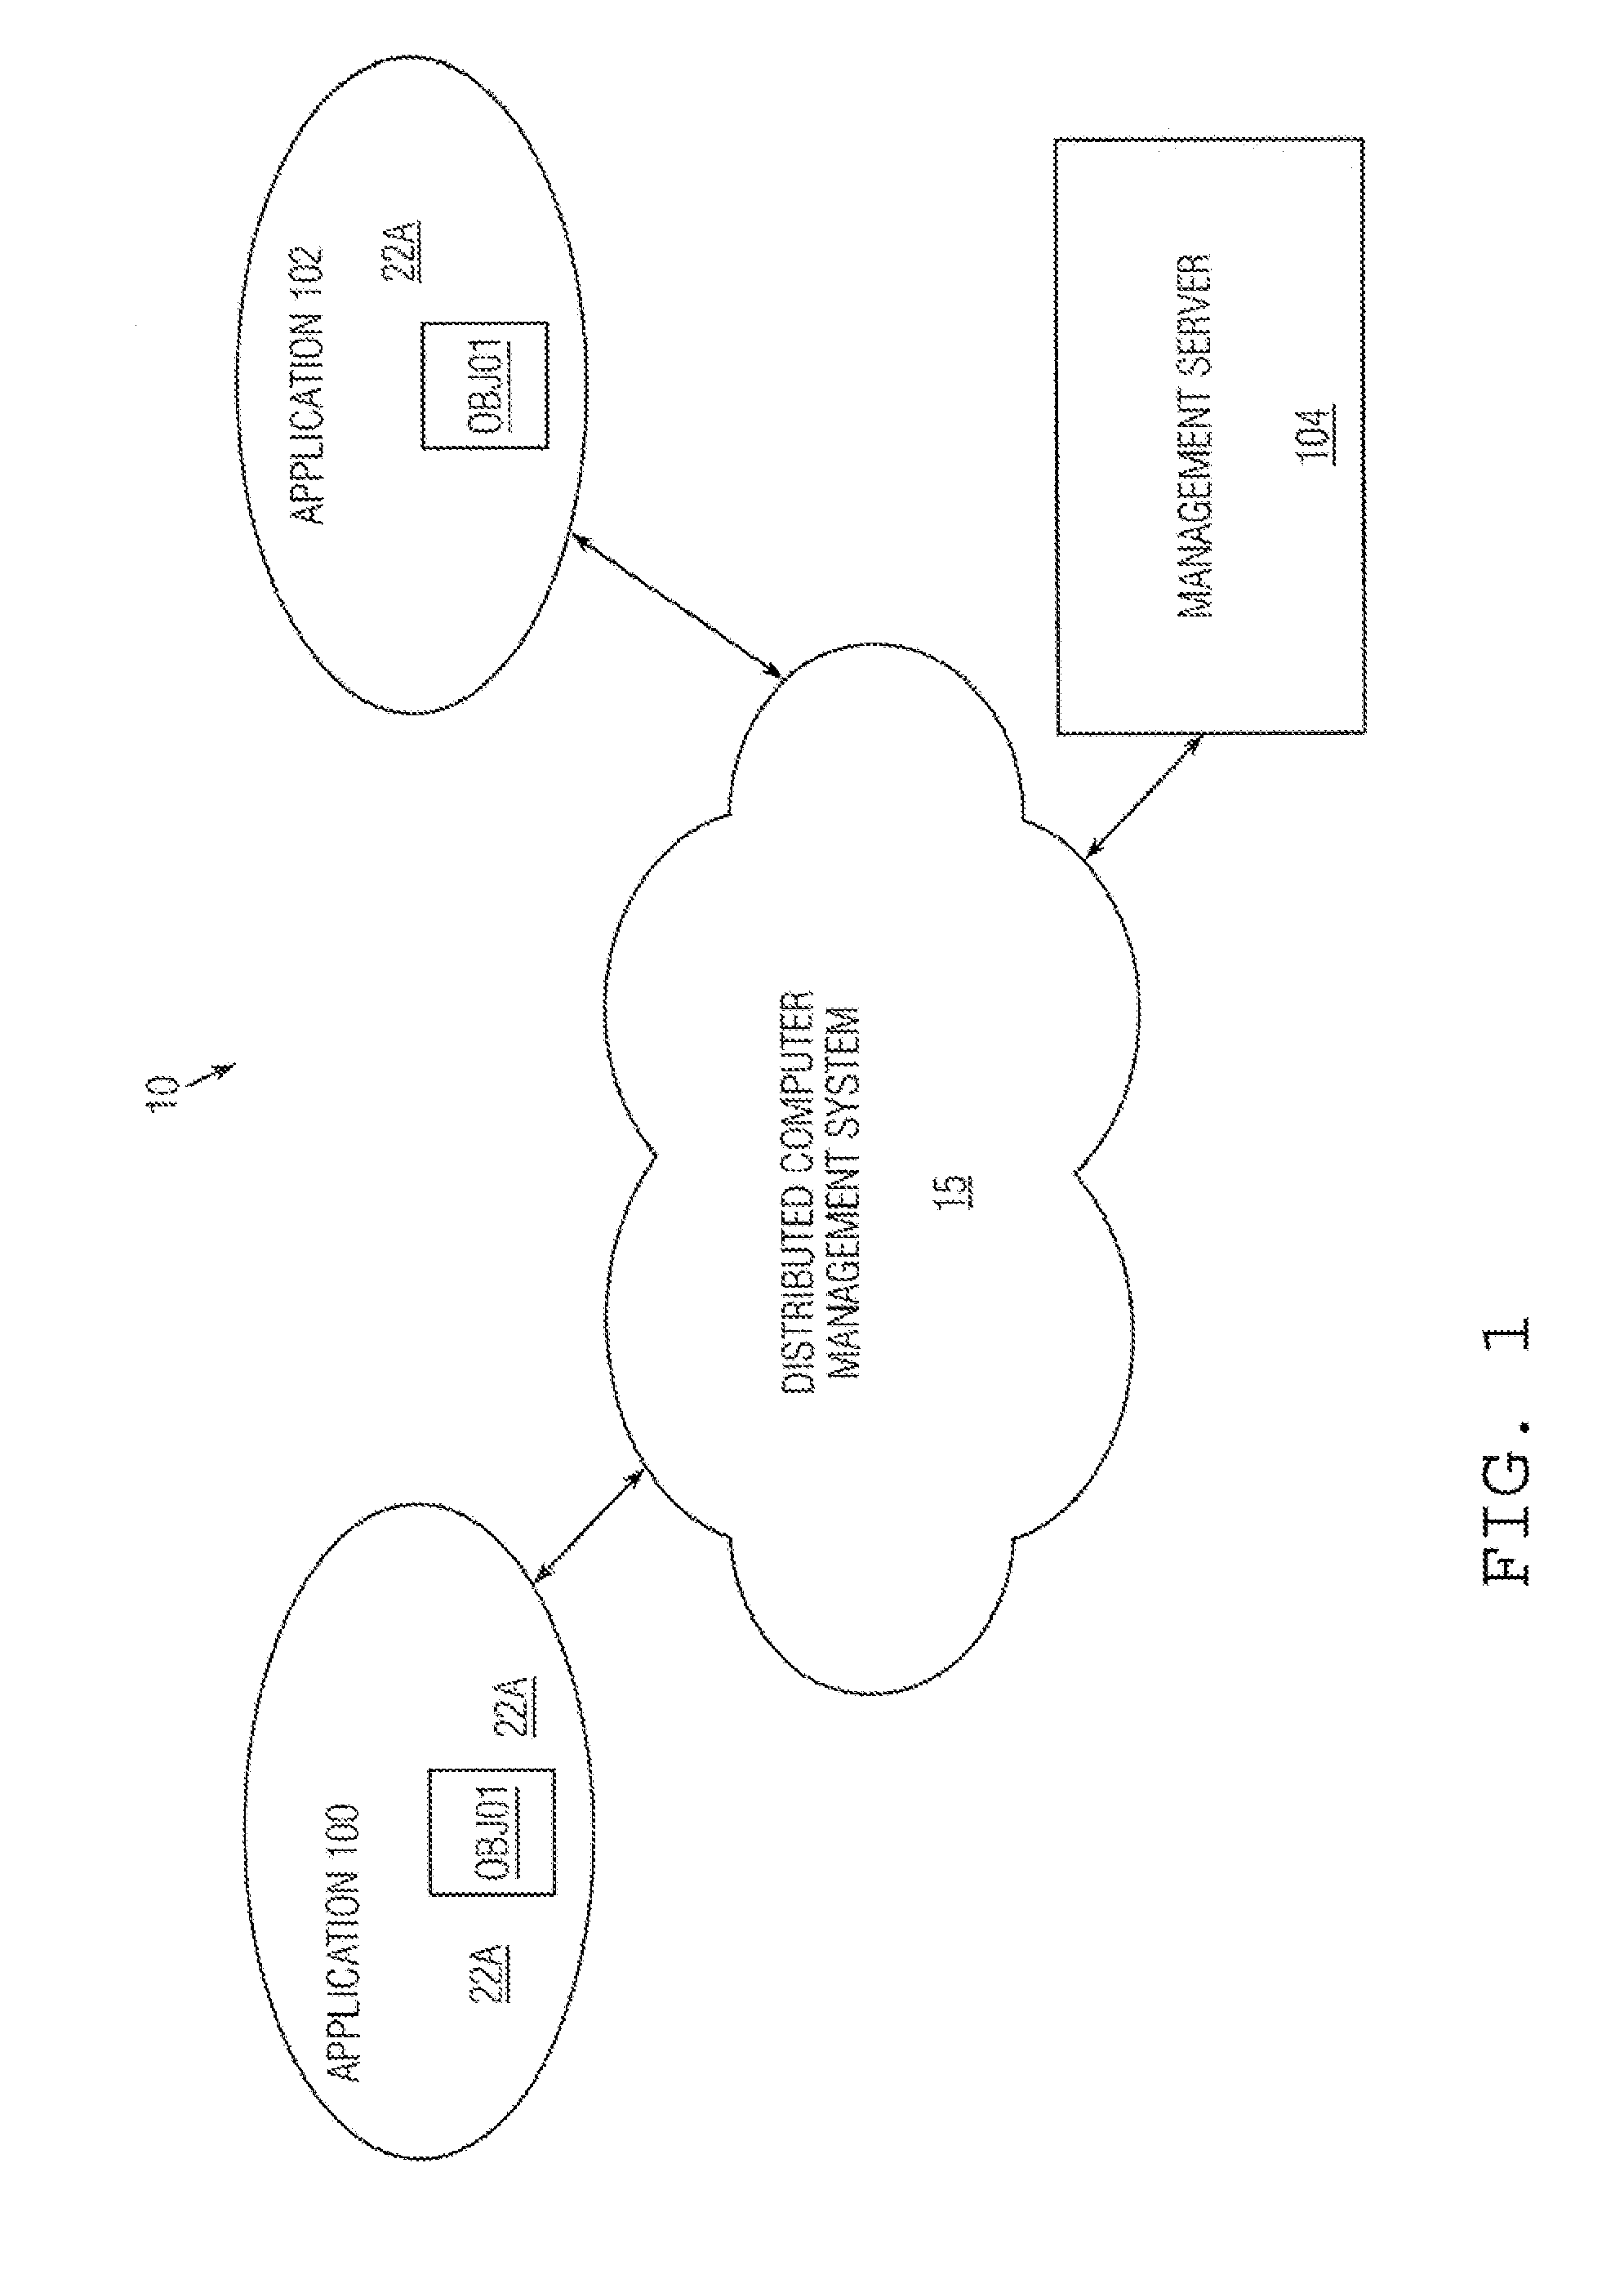 System for sharing data objects among applications